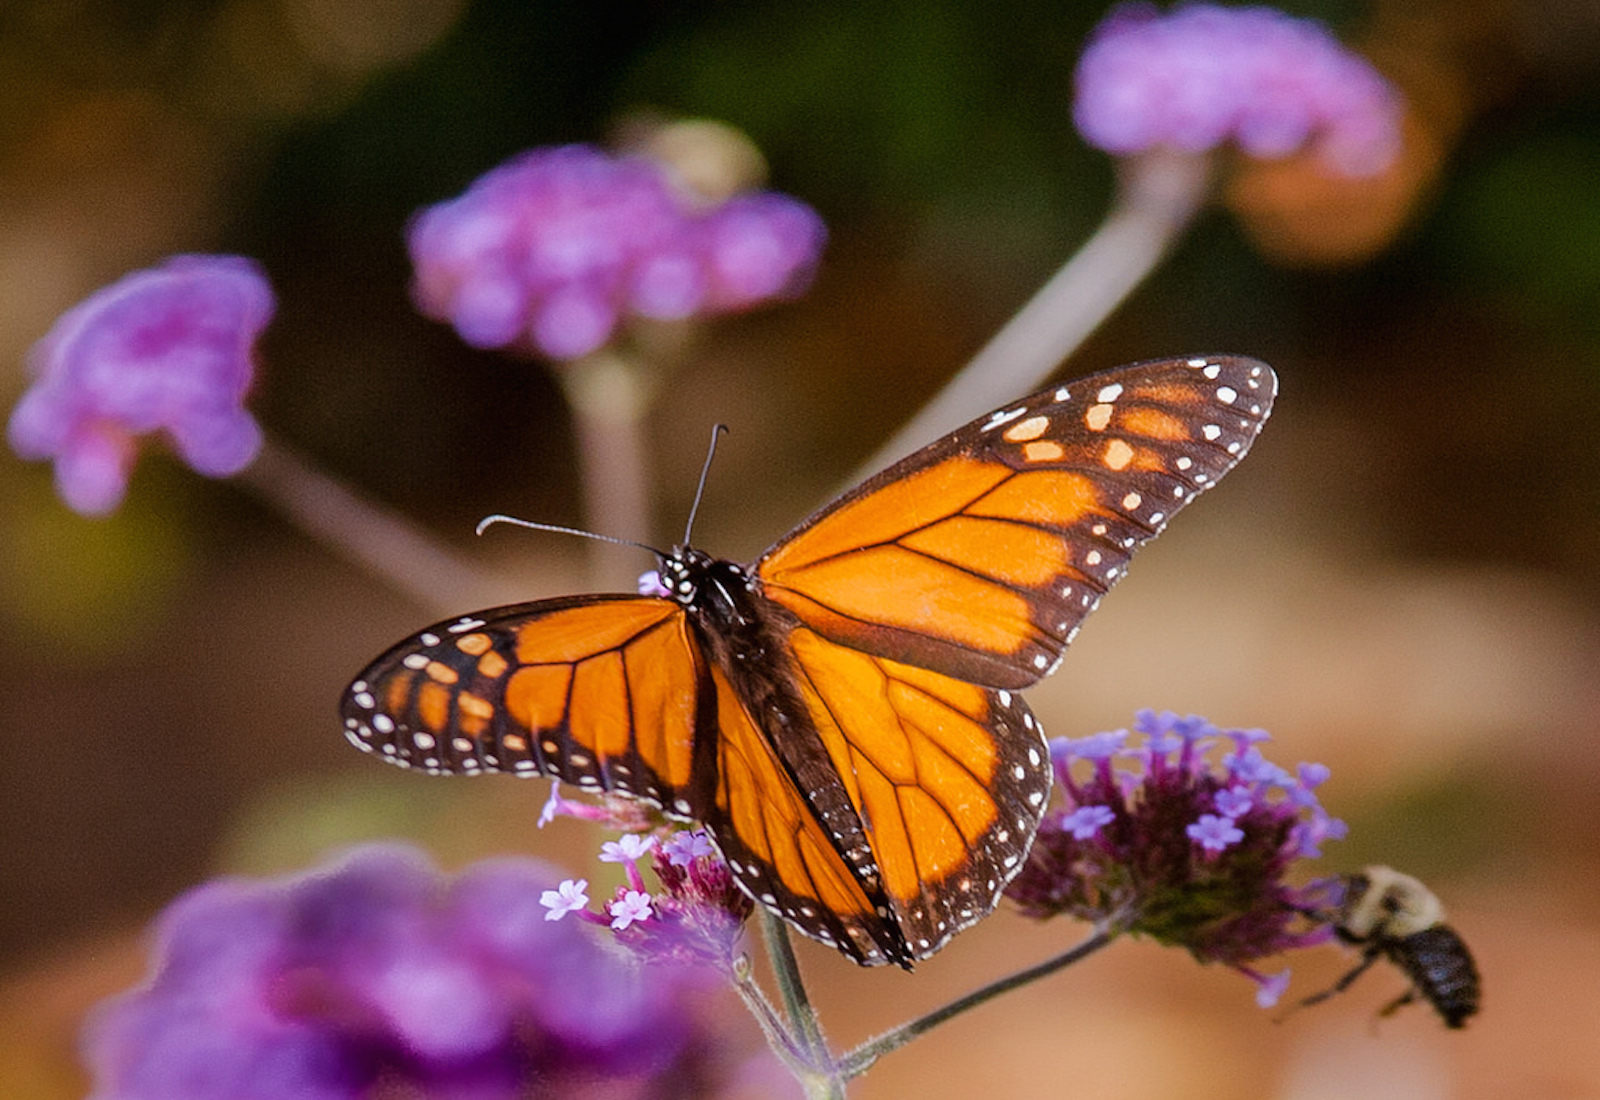 7 Ways to Attract More Butterflies to Your Garden (and Save Them From Extinction)